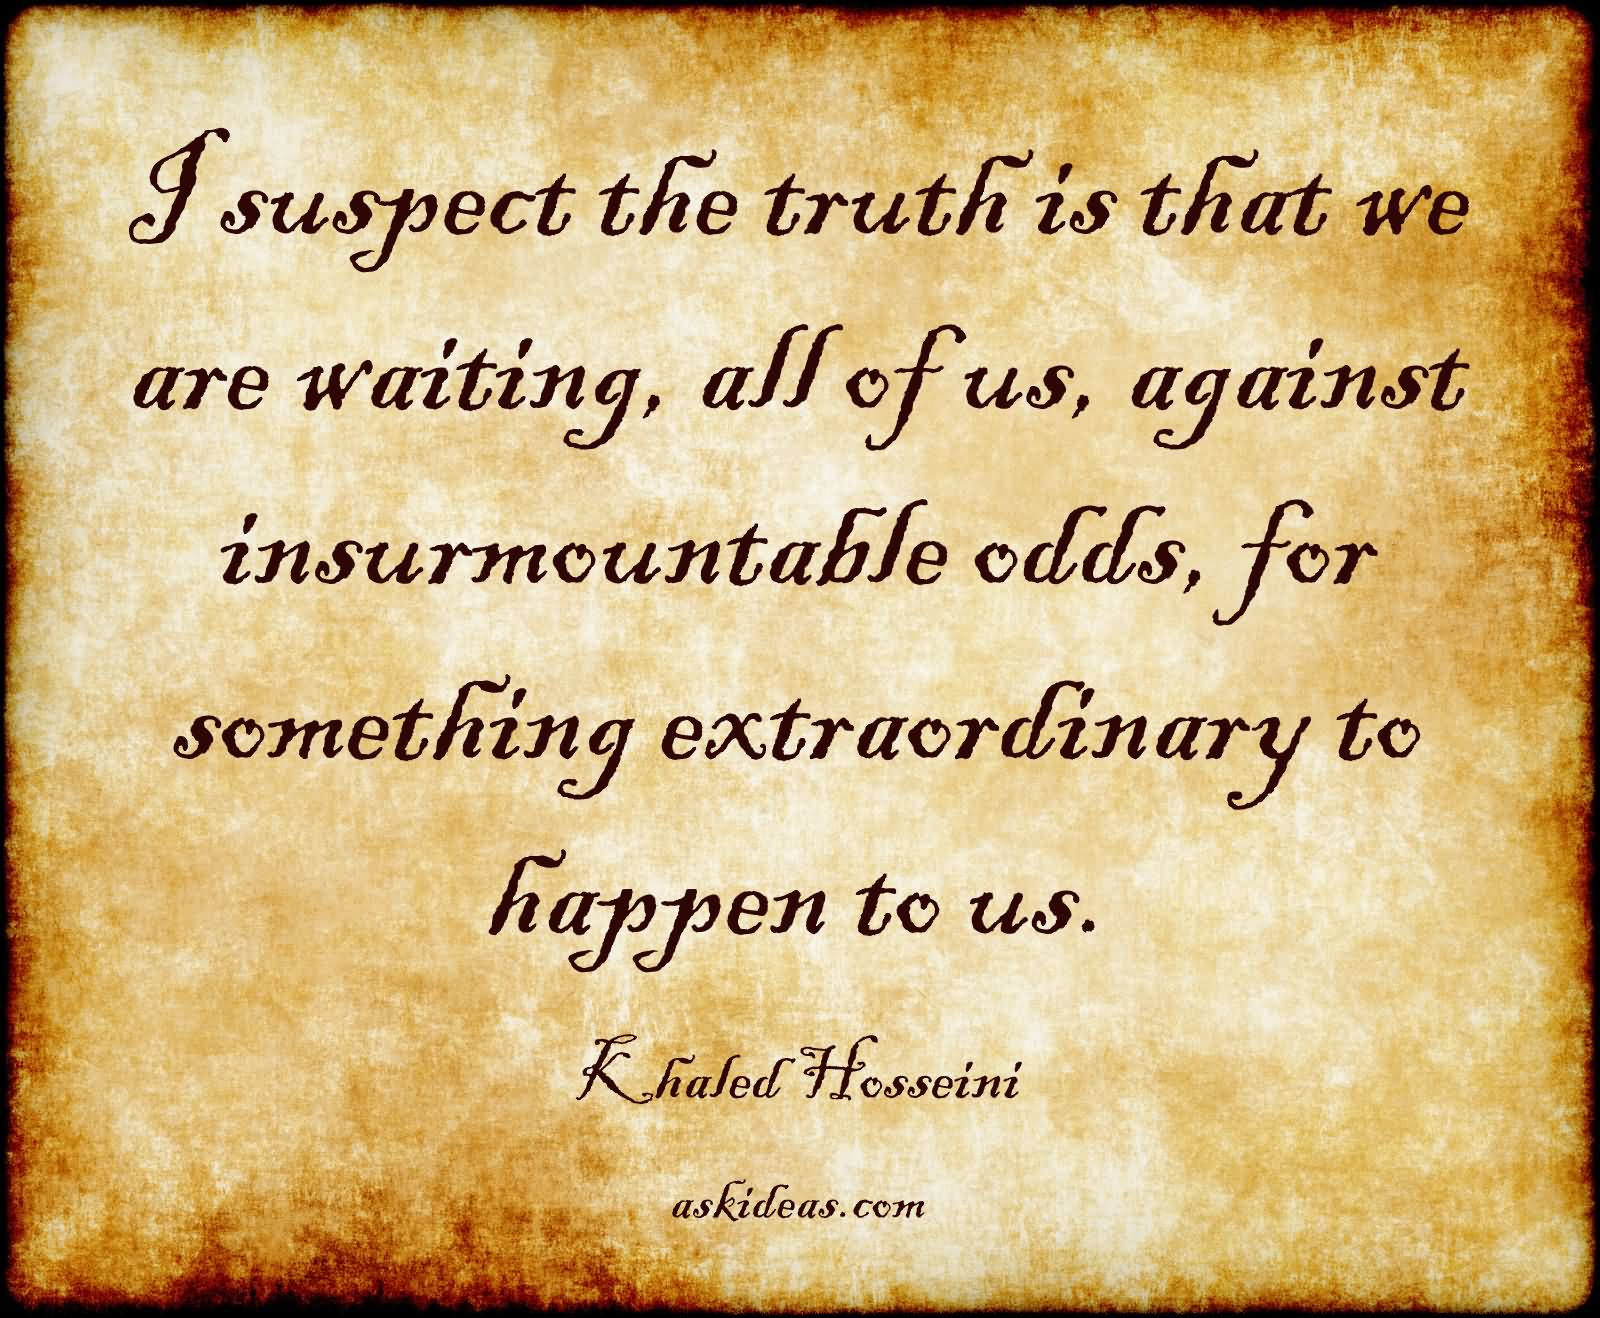 I suspect the truth is that we are waiting, all of us, against insurmountable odds, for something extraordinary to happen to us.